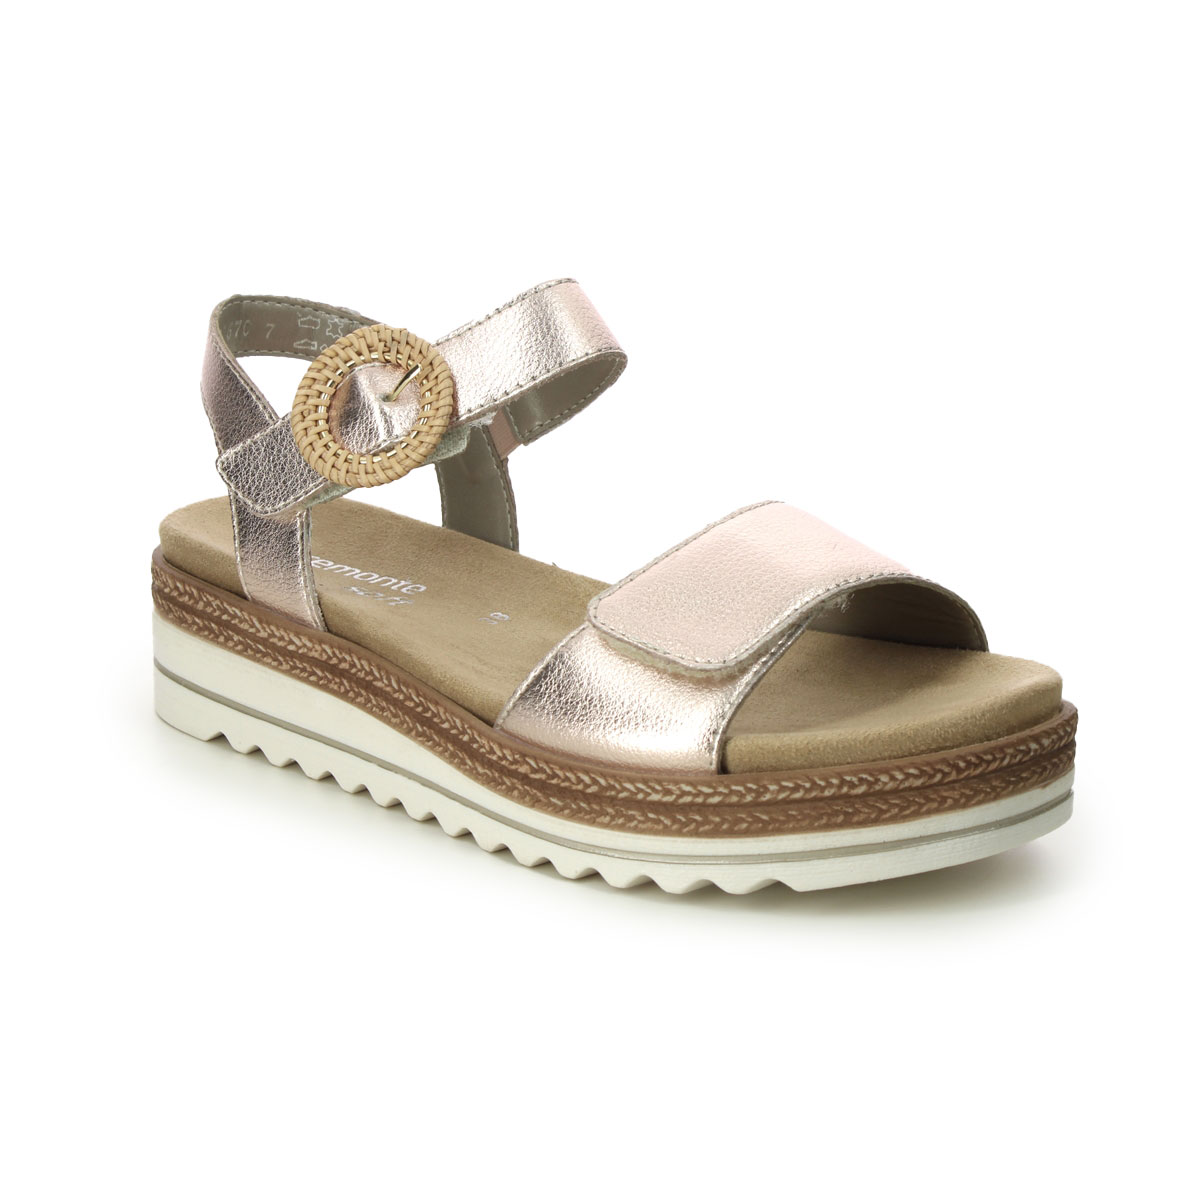 Remonte D0Q52-31 Bily  Flatform Platinum Womens Wedge Sandals in a Plain Leather in Size 37